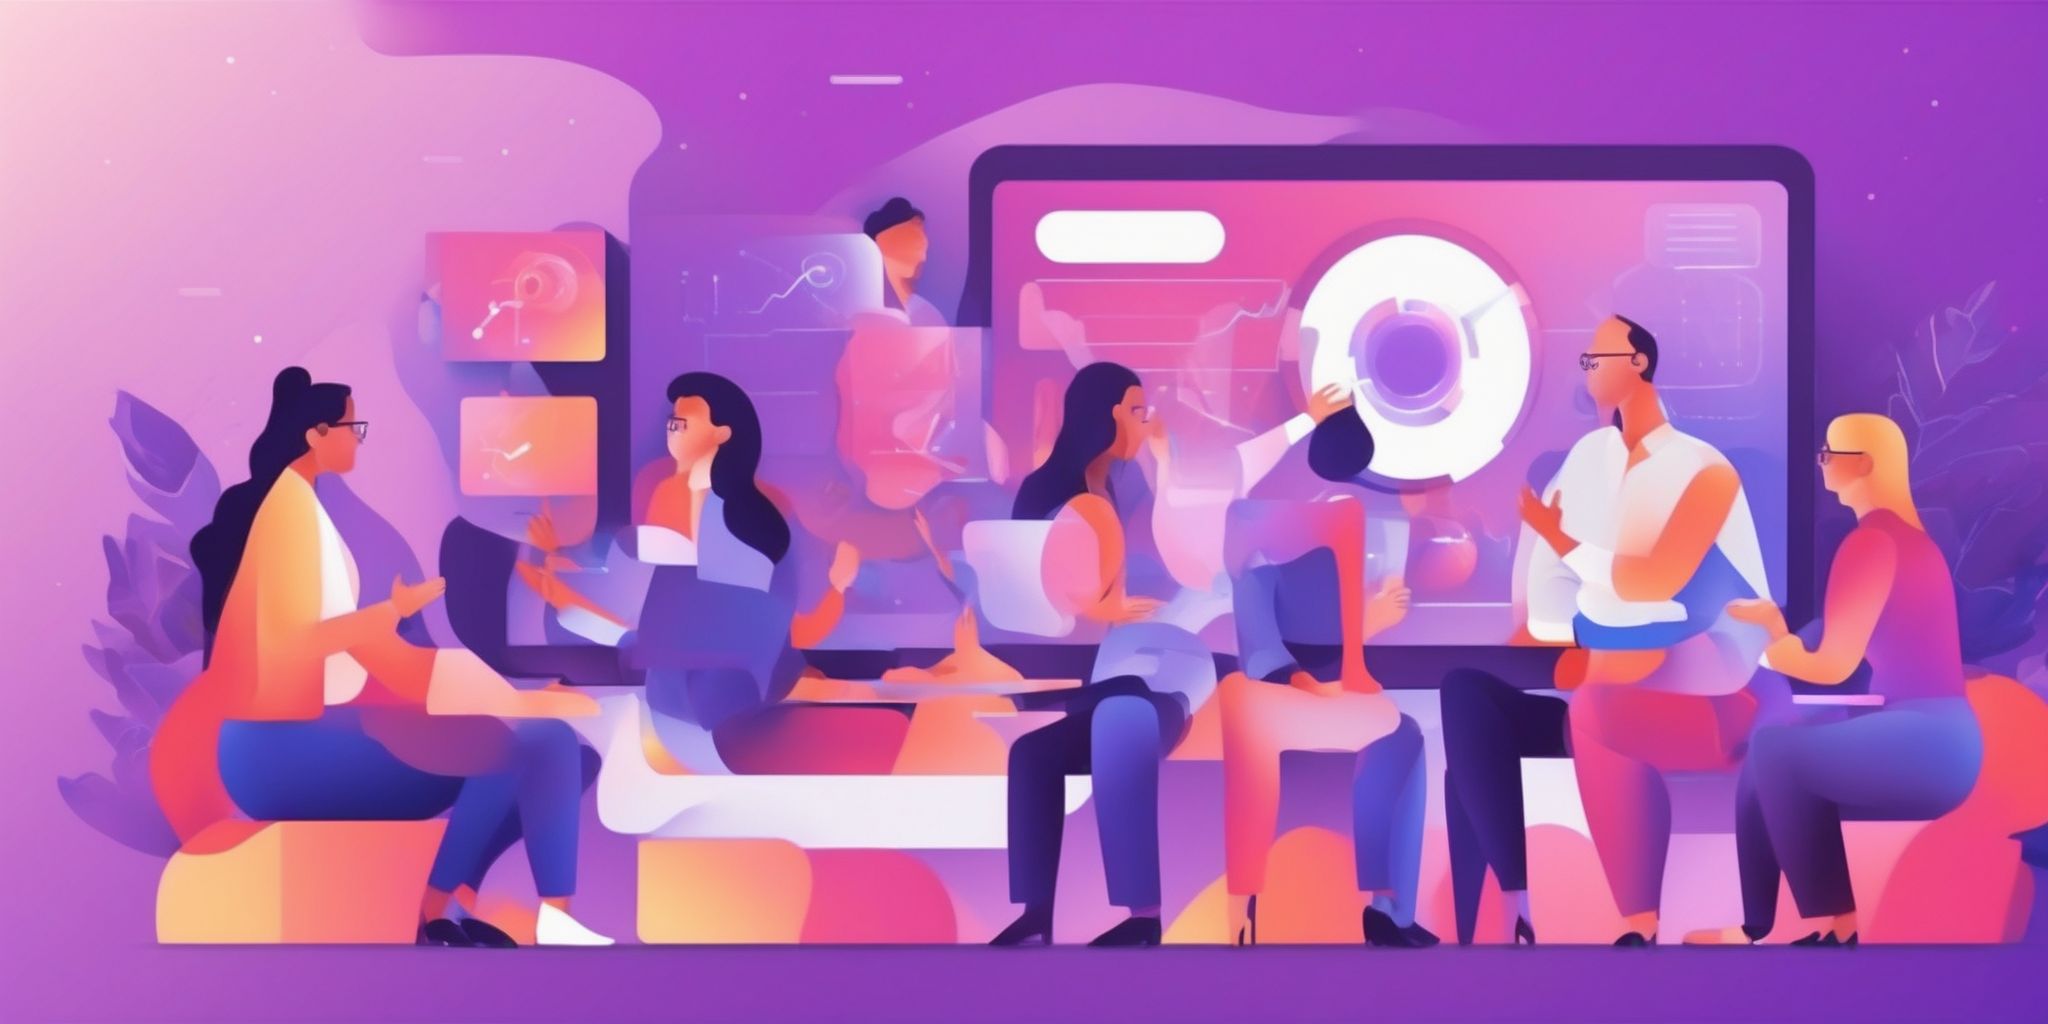 Google search - Zoom meeting in flat illustration style, colorful purple gradient colors